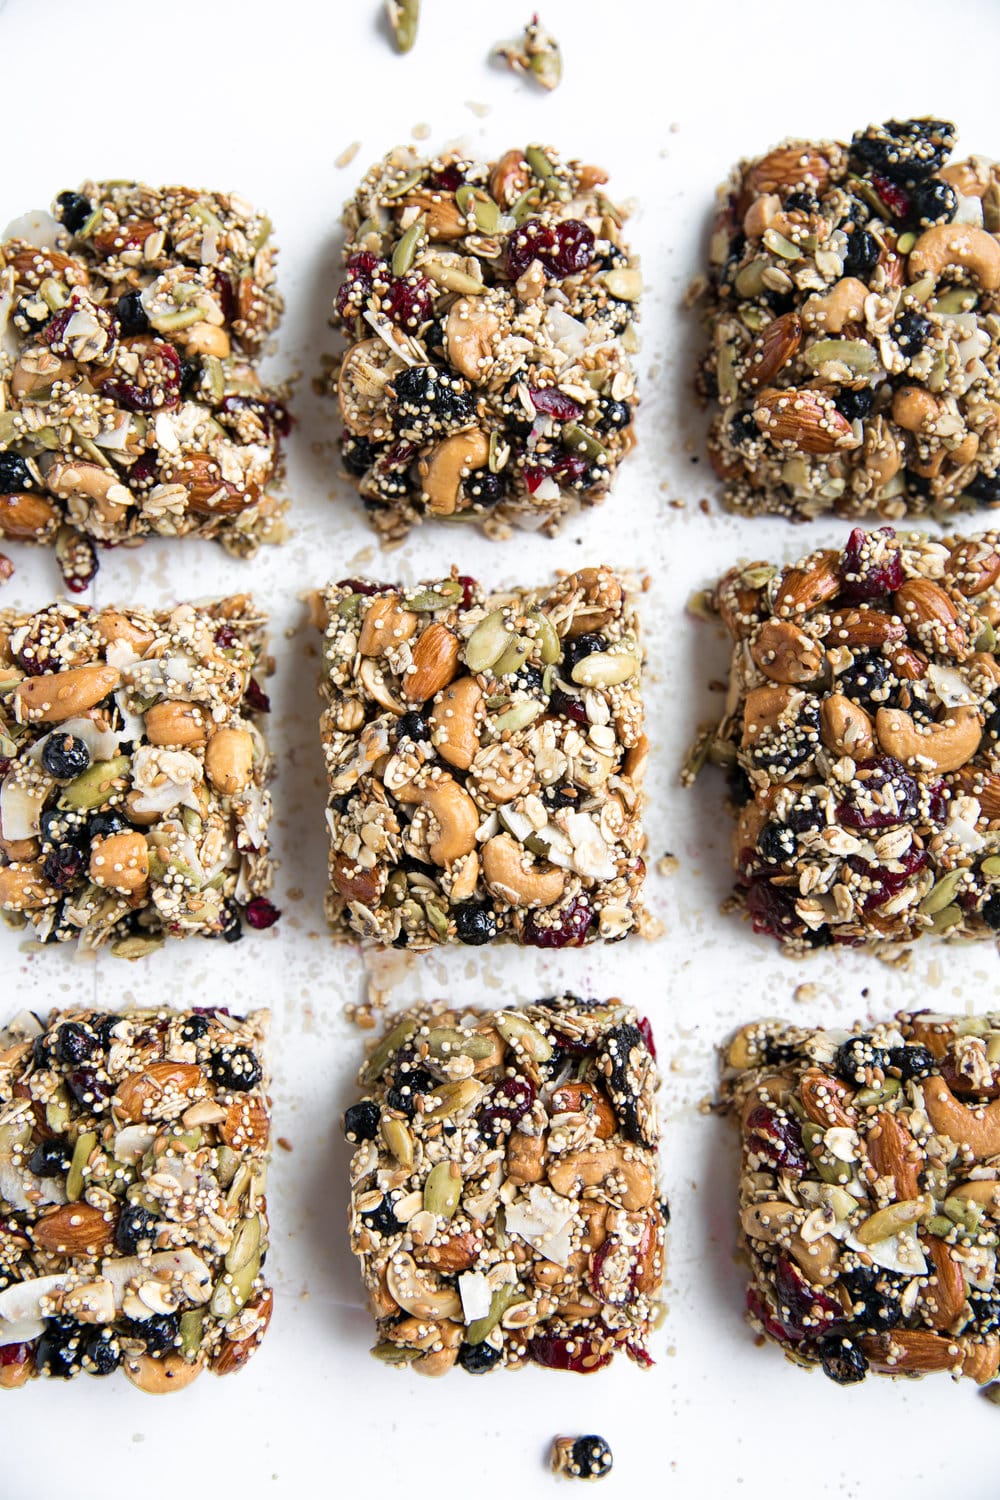 Packed full of nuts, seeds, dried fruit, and oats, these perfectly sweet Superfood Oat Bars are gluten-free, dairy-free, and make the best snack ever!